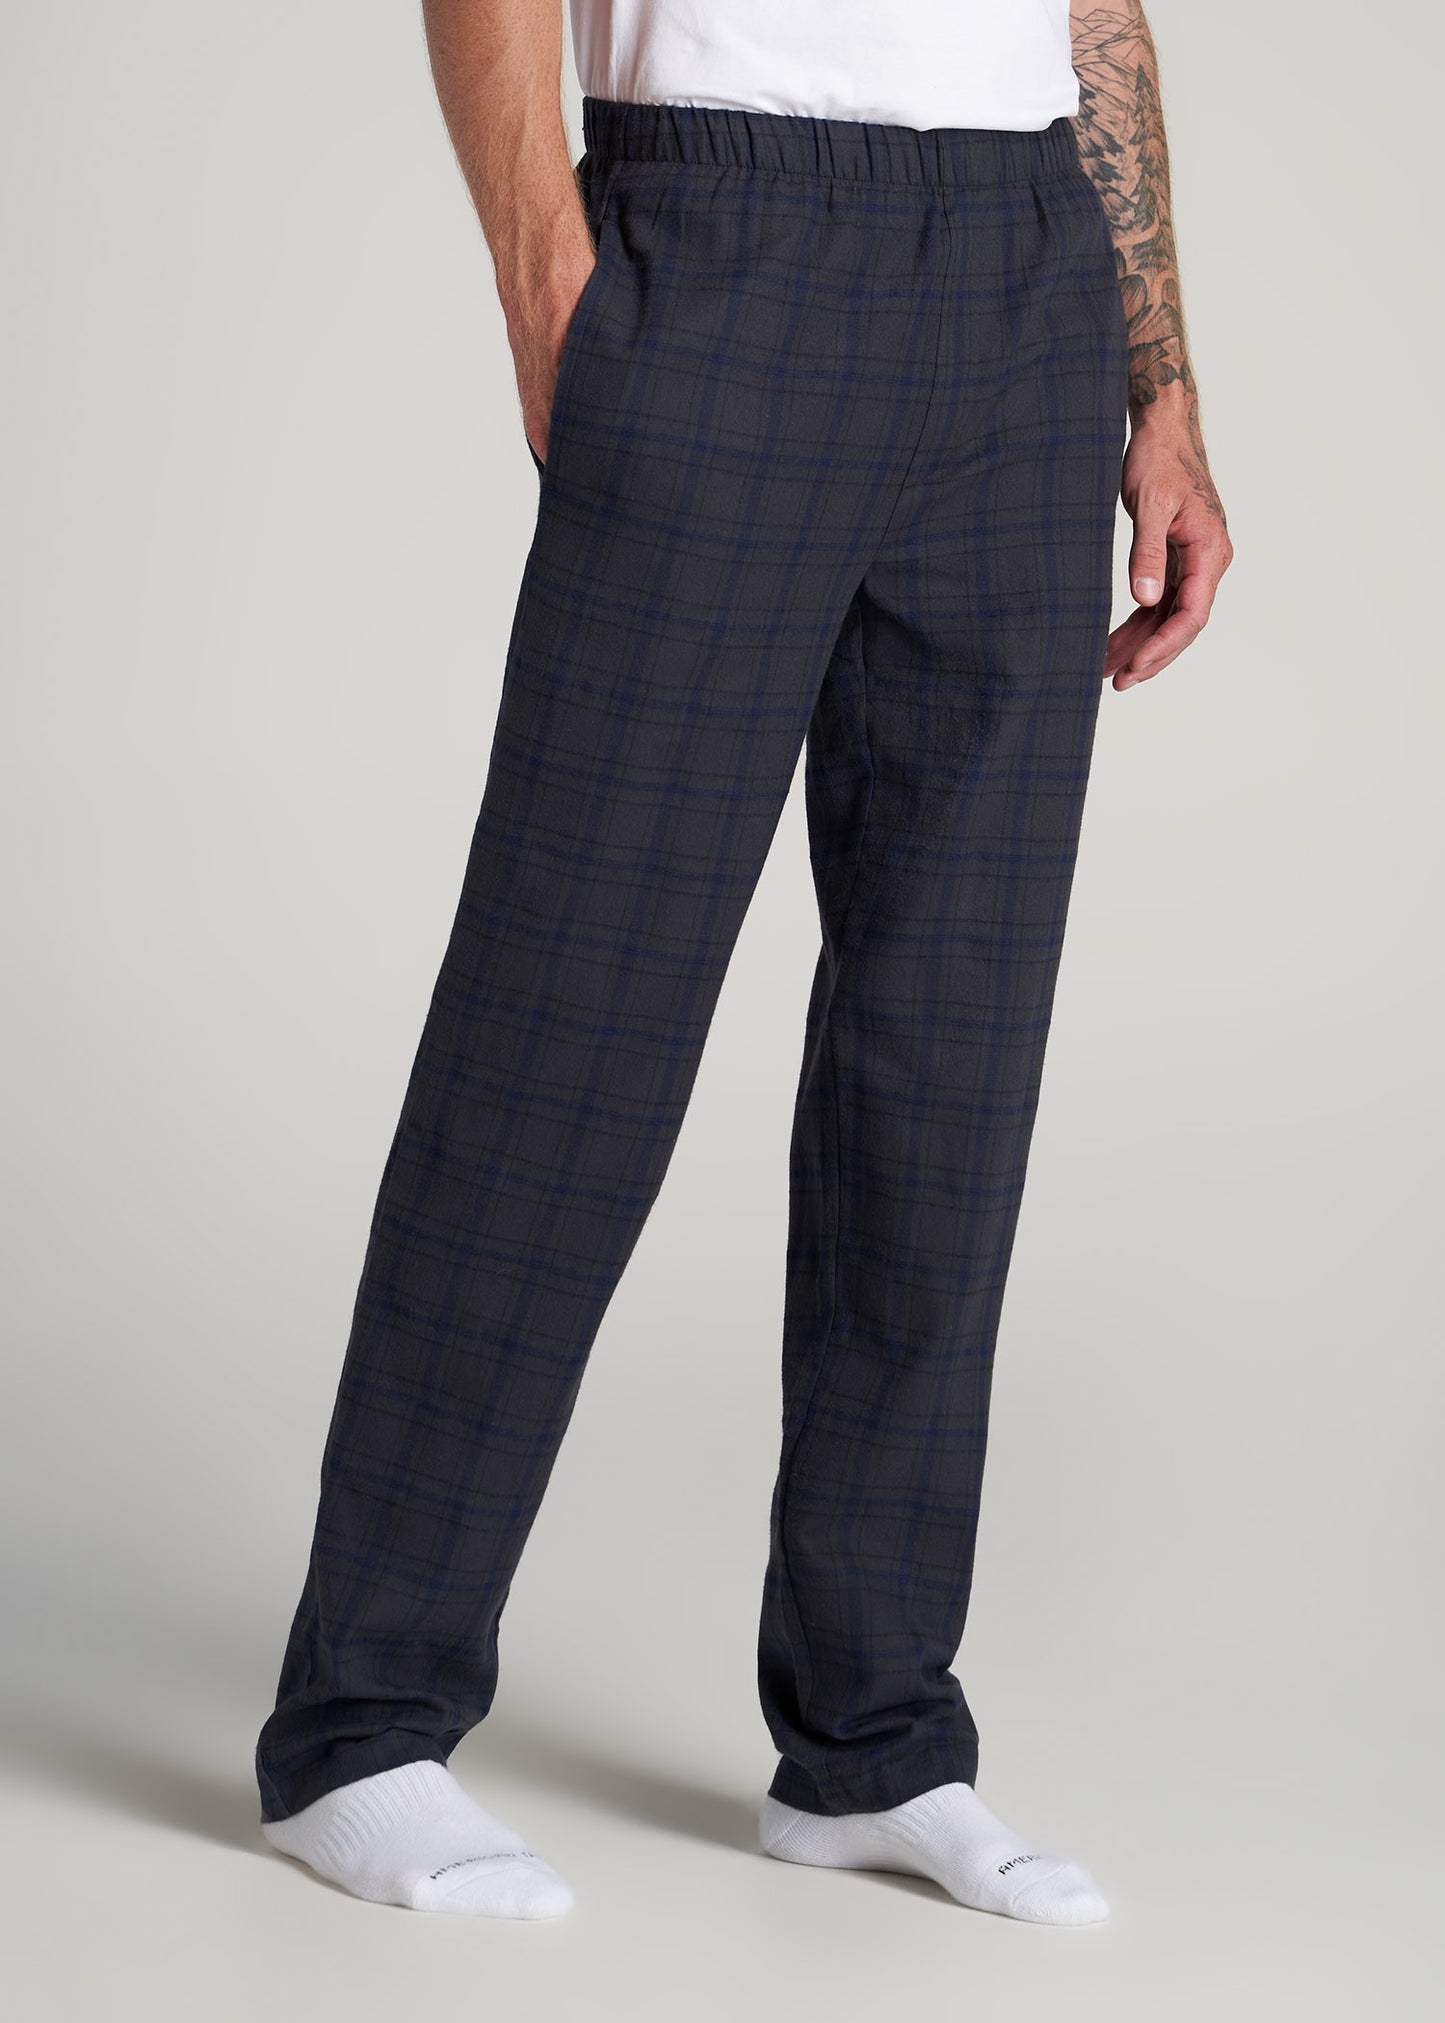    American-Tall-Men-Flannel-Pajamas-Charcoal-Navy-Plaid-side